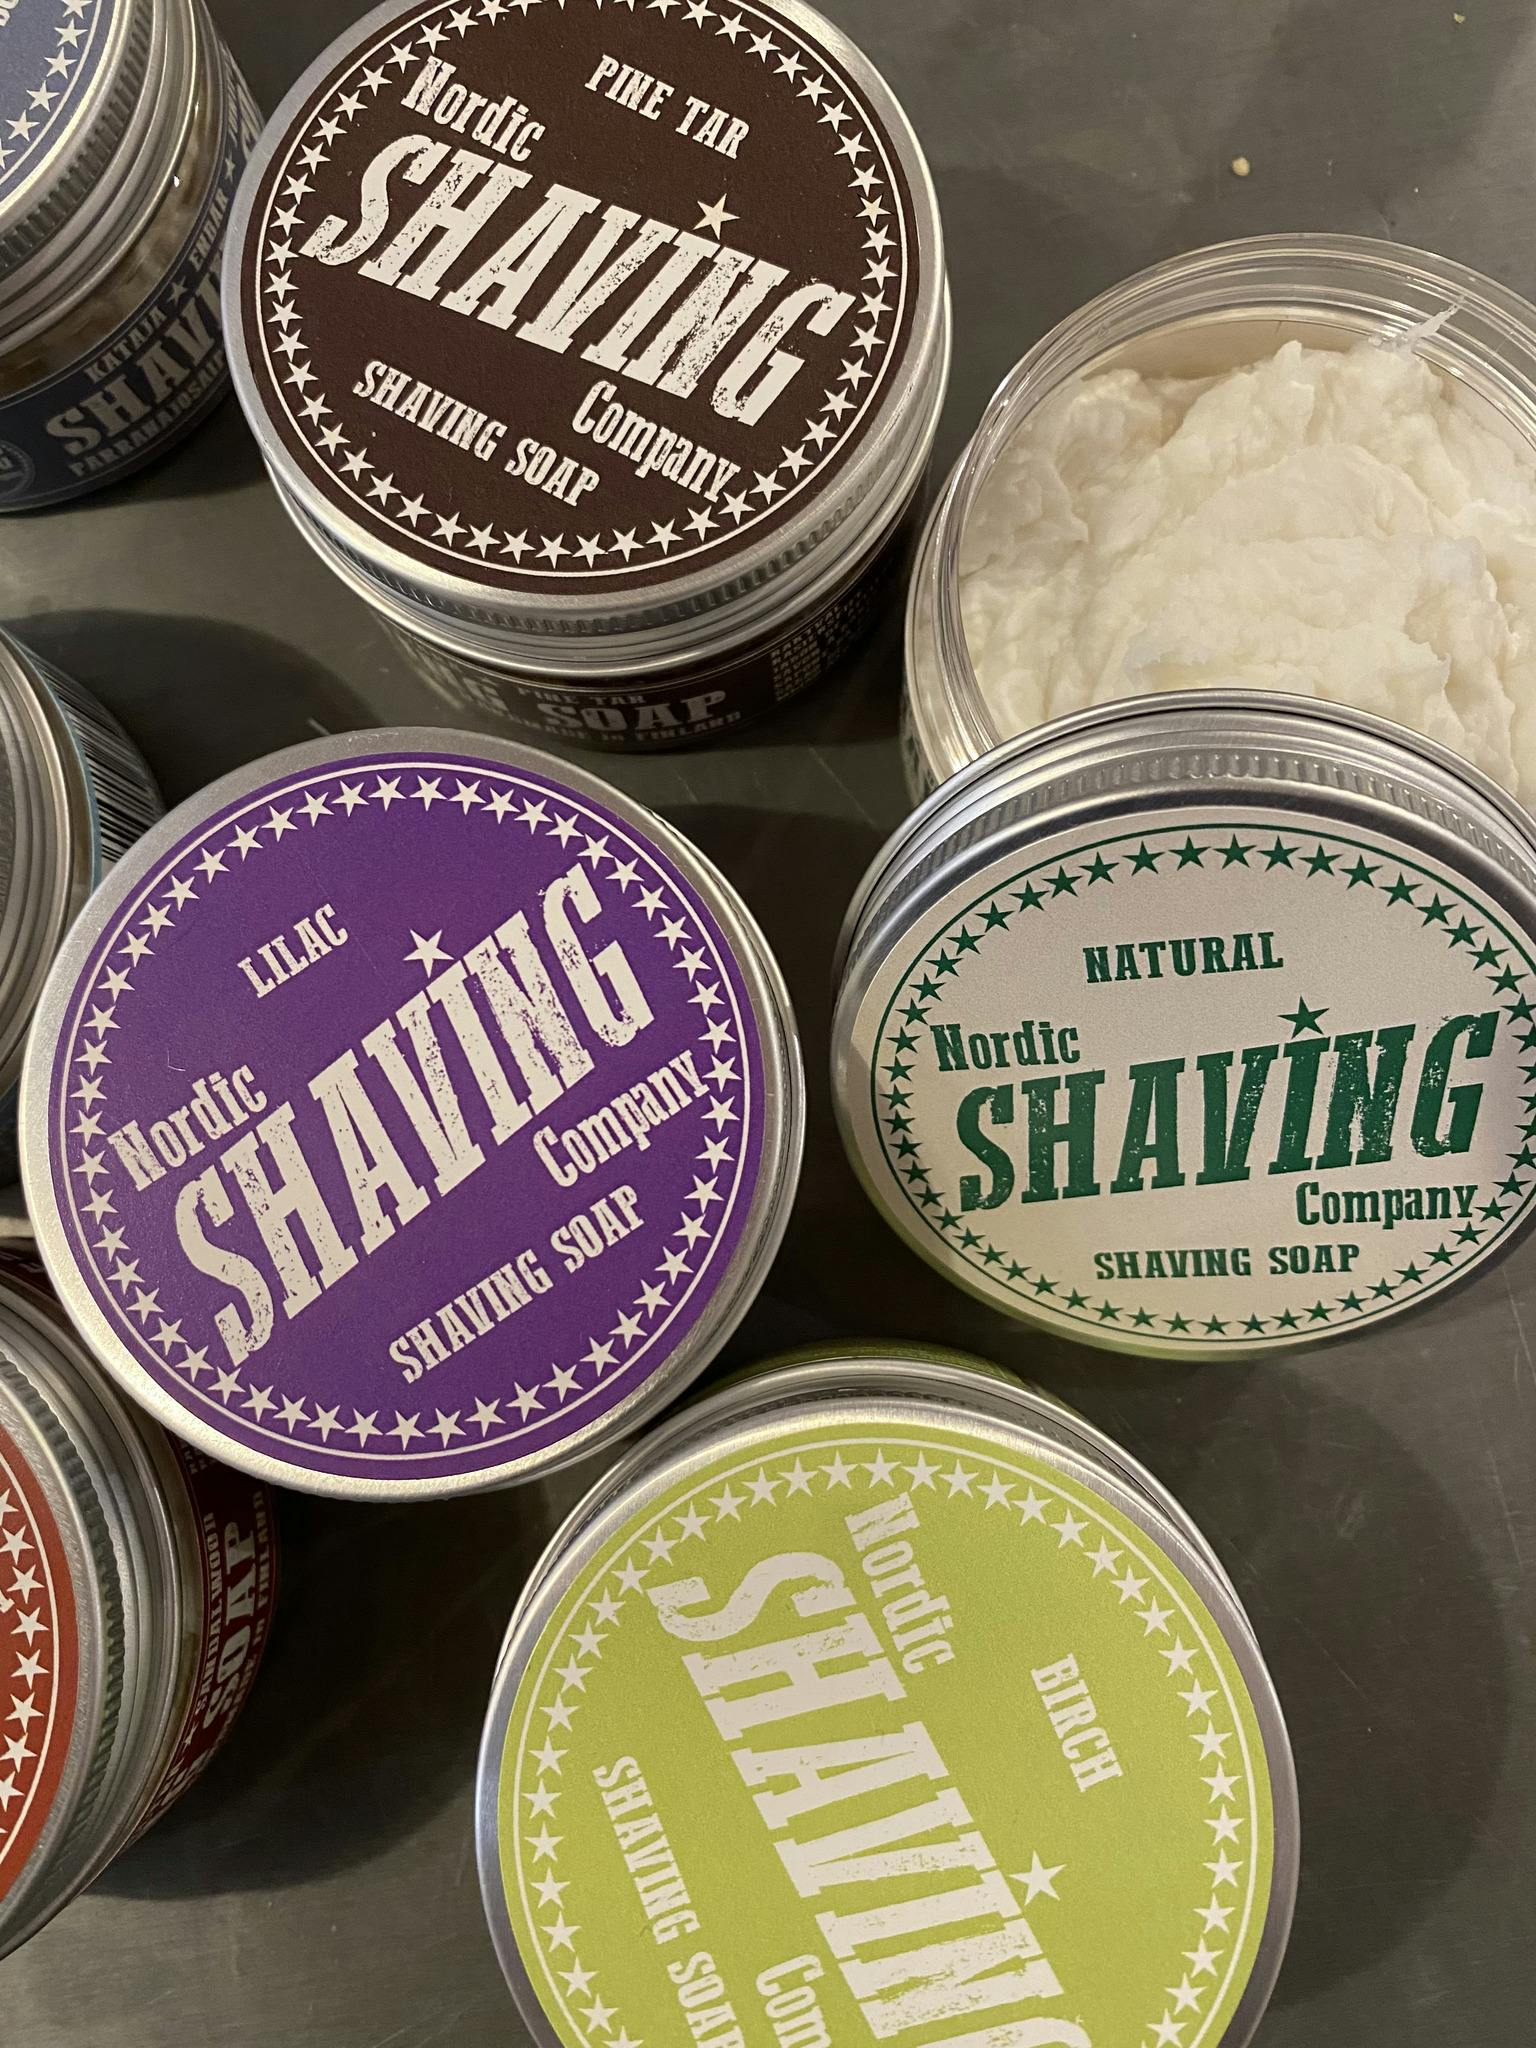 A sélection of gift soaps for men's wet shaving in a retro travel tin and natural scents. Moisturising.